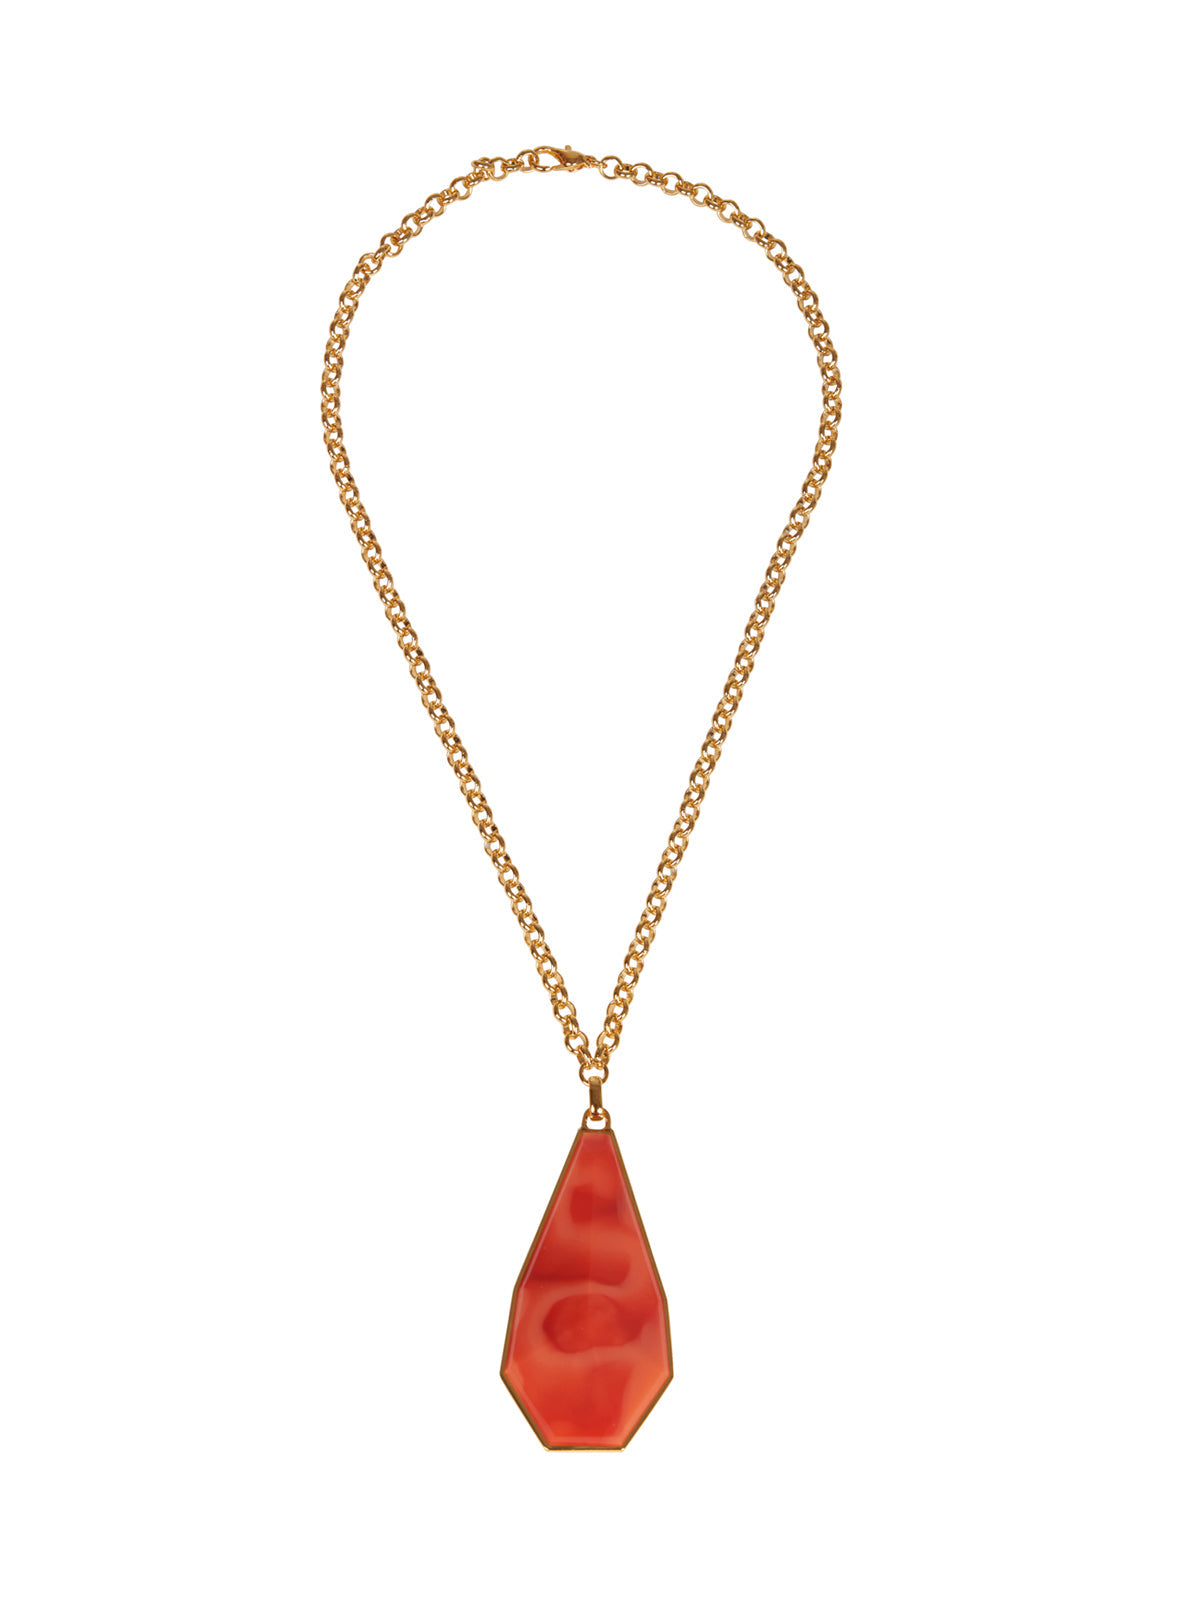 Order an Ascoli Necklace Orange with an orange stone on a gold chain today!